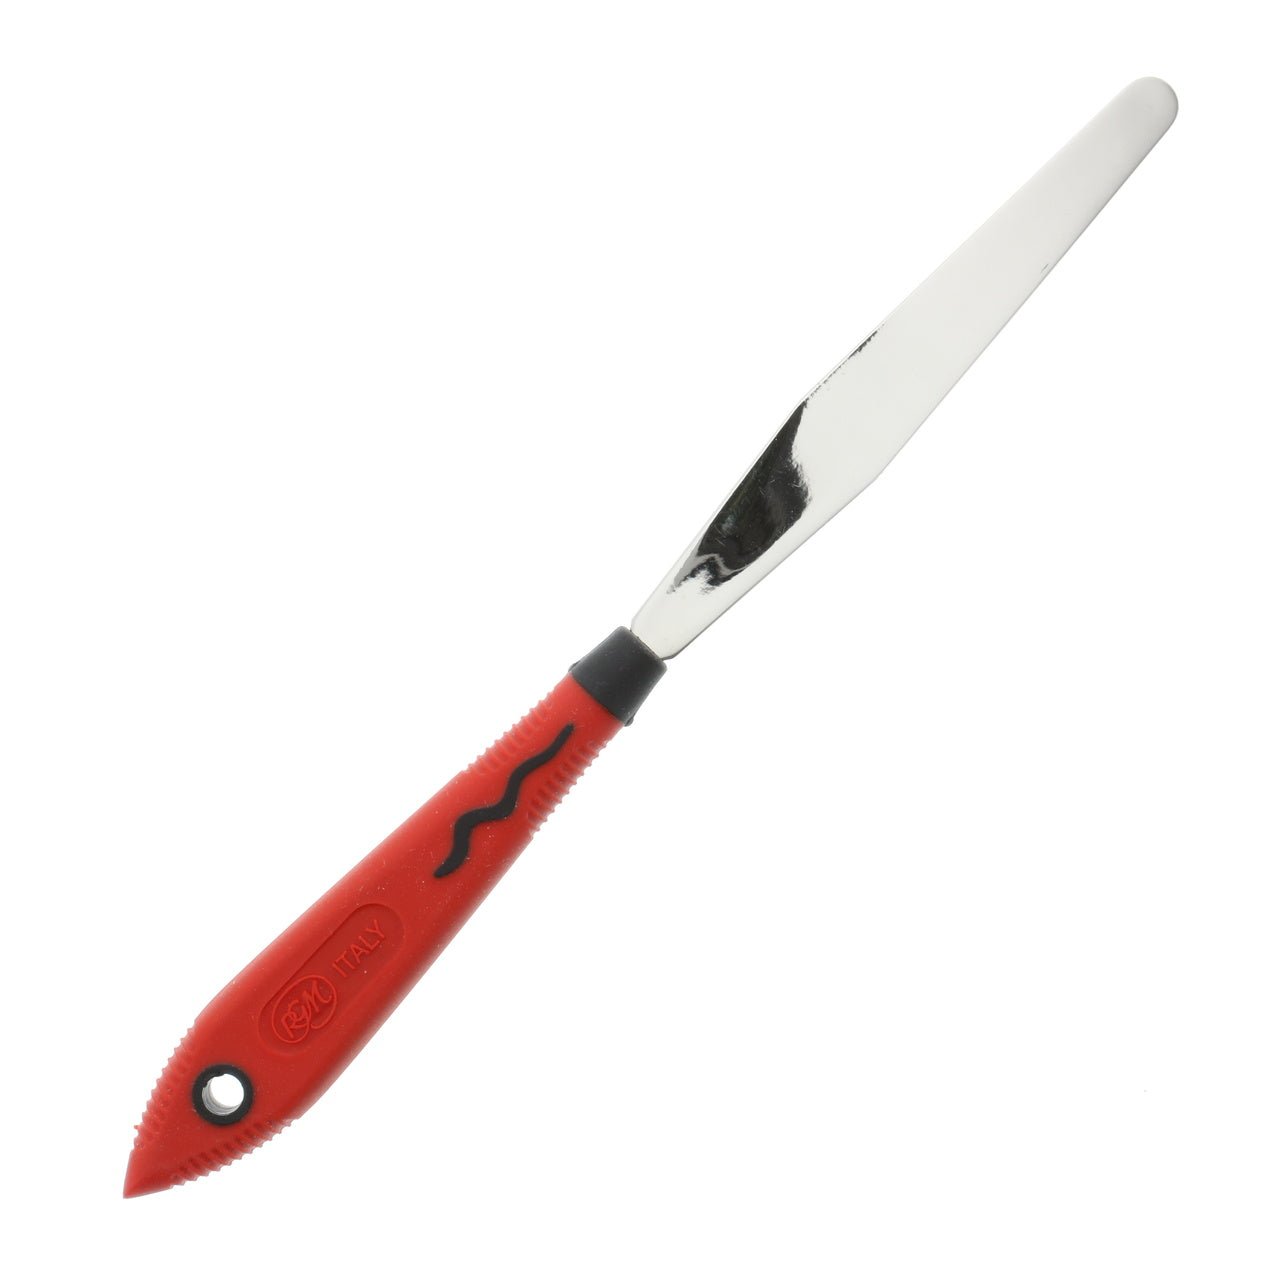 RGM Soft Grip Painting Knife #110 (Red Handle)